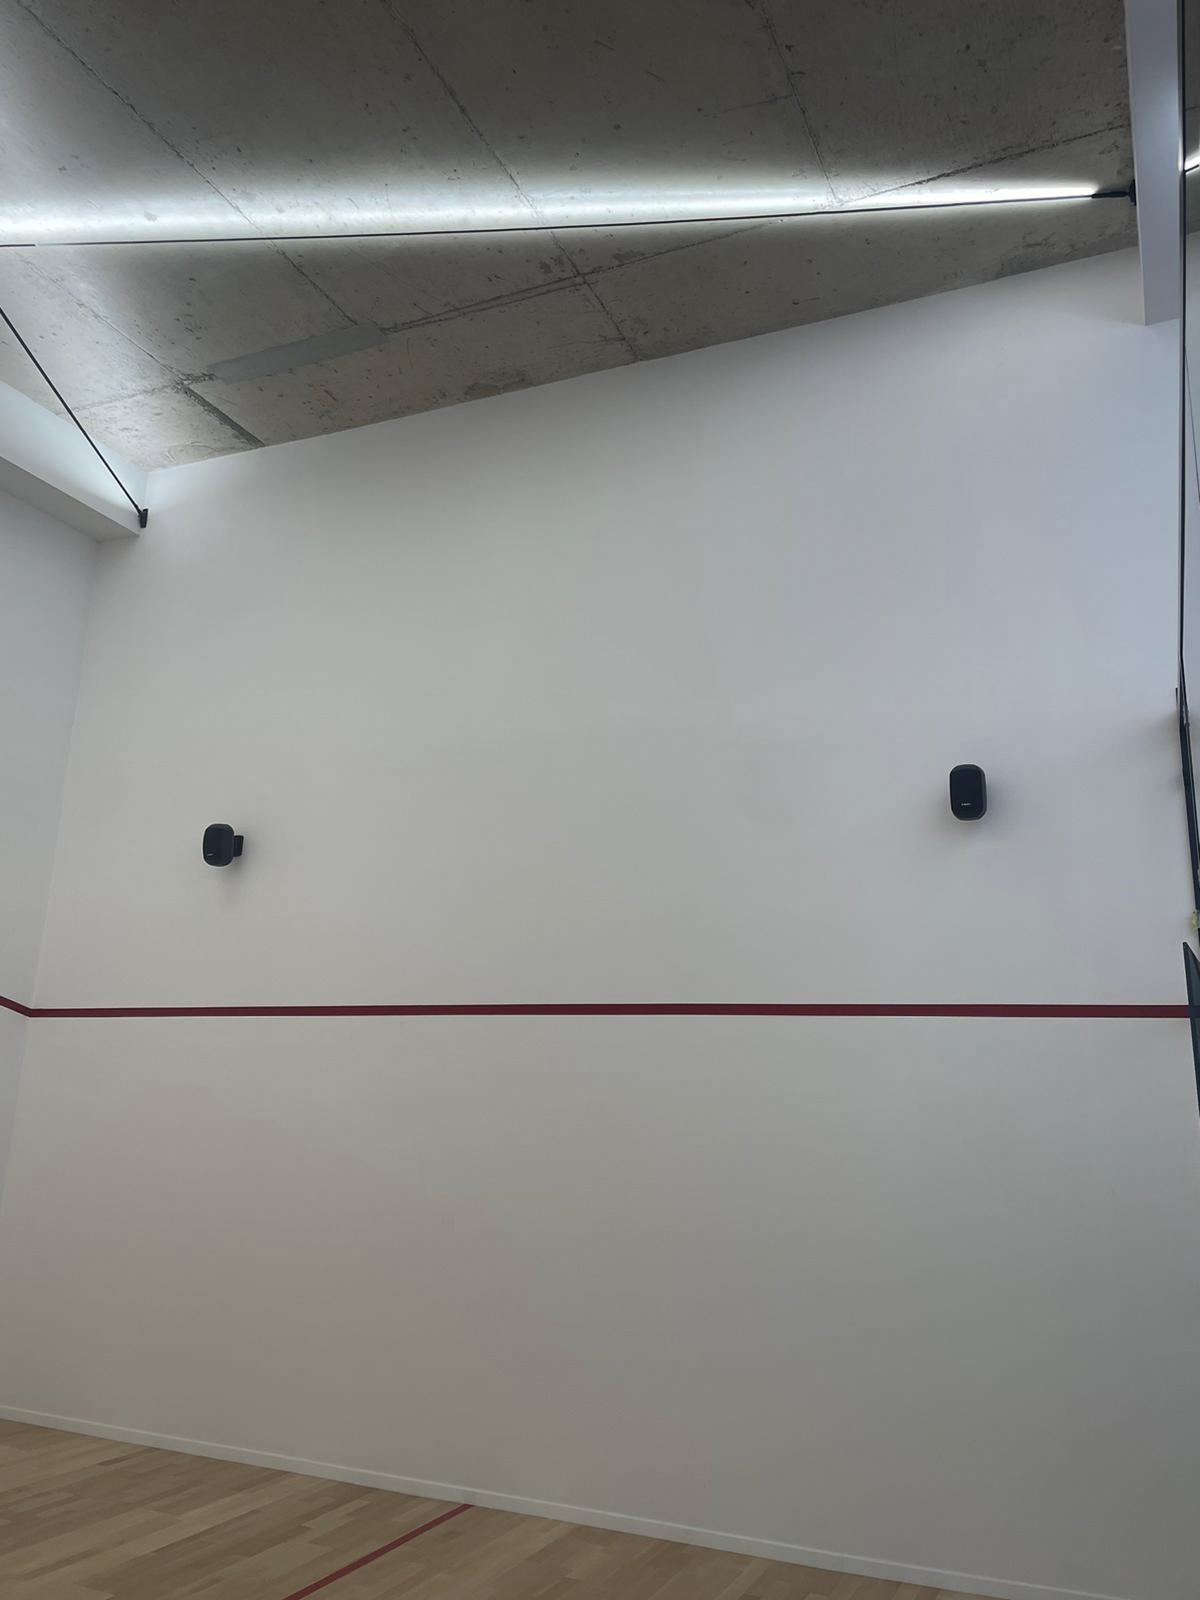 Astral projects squash court Smart Lighting and Audio Control System